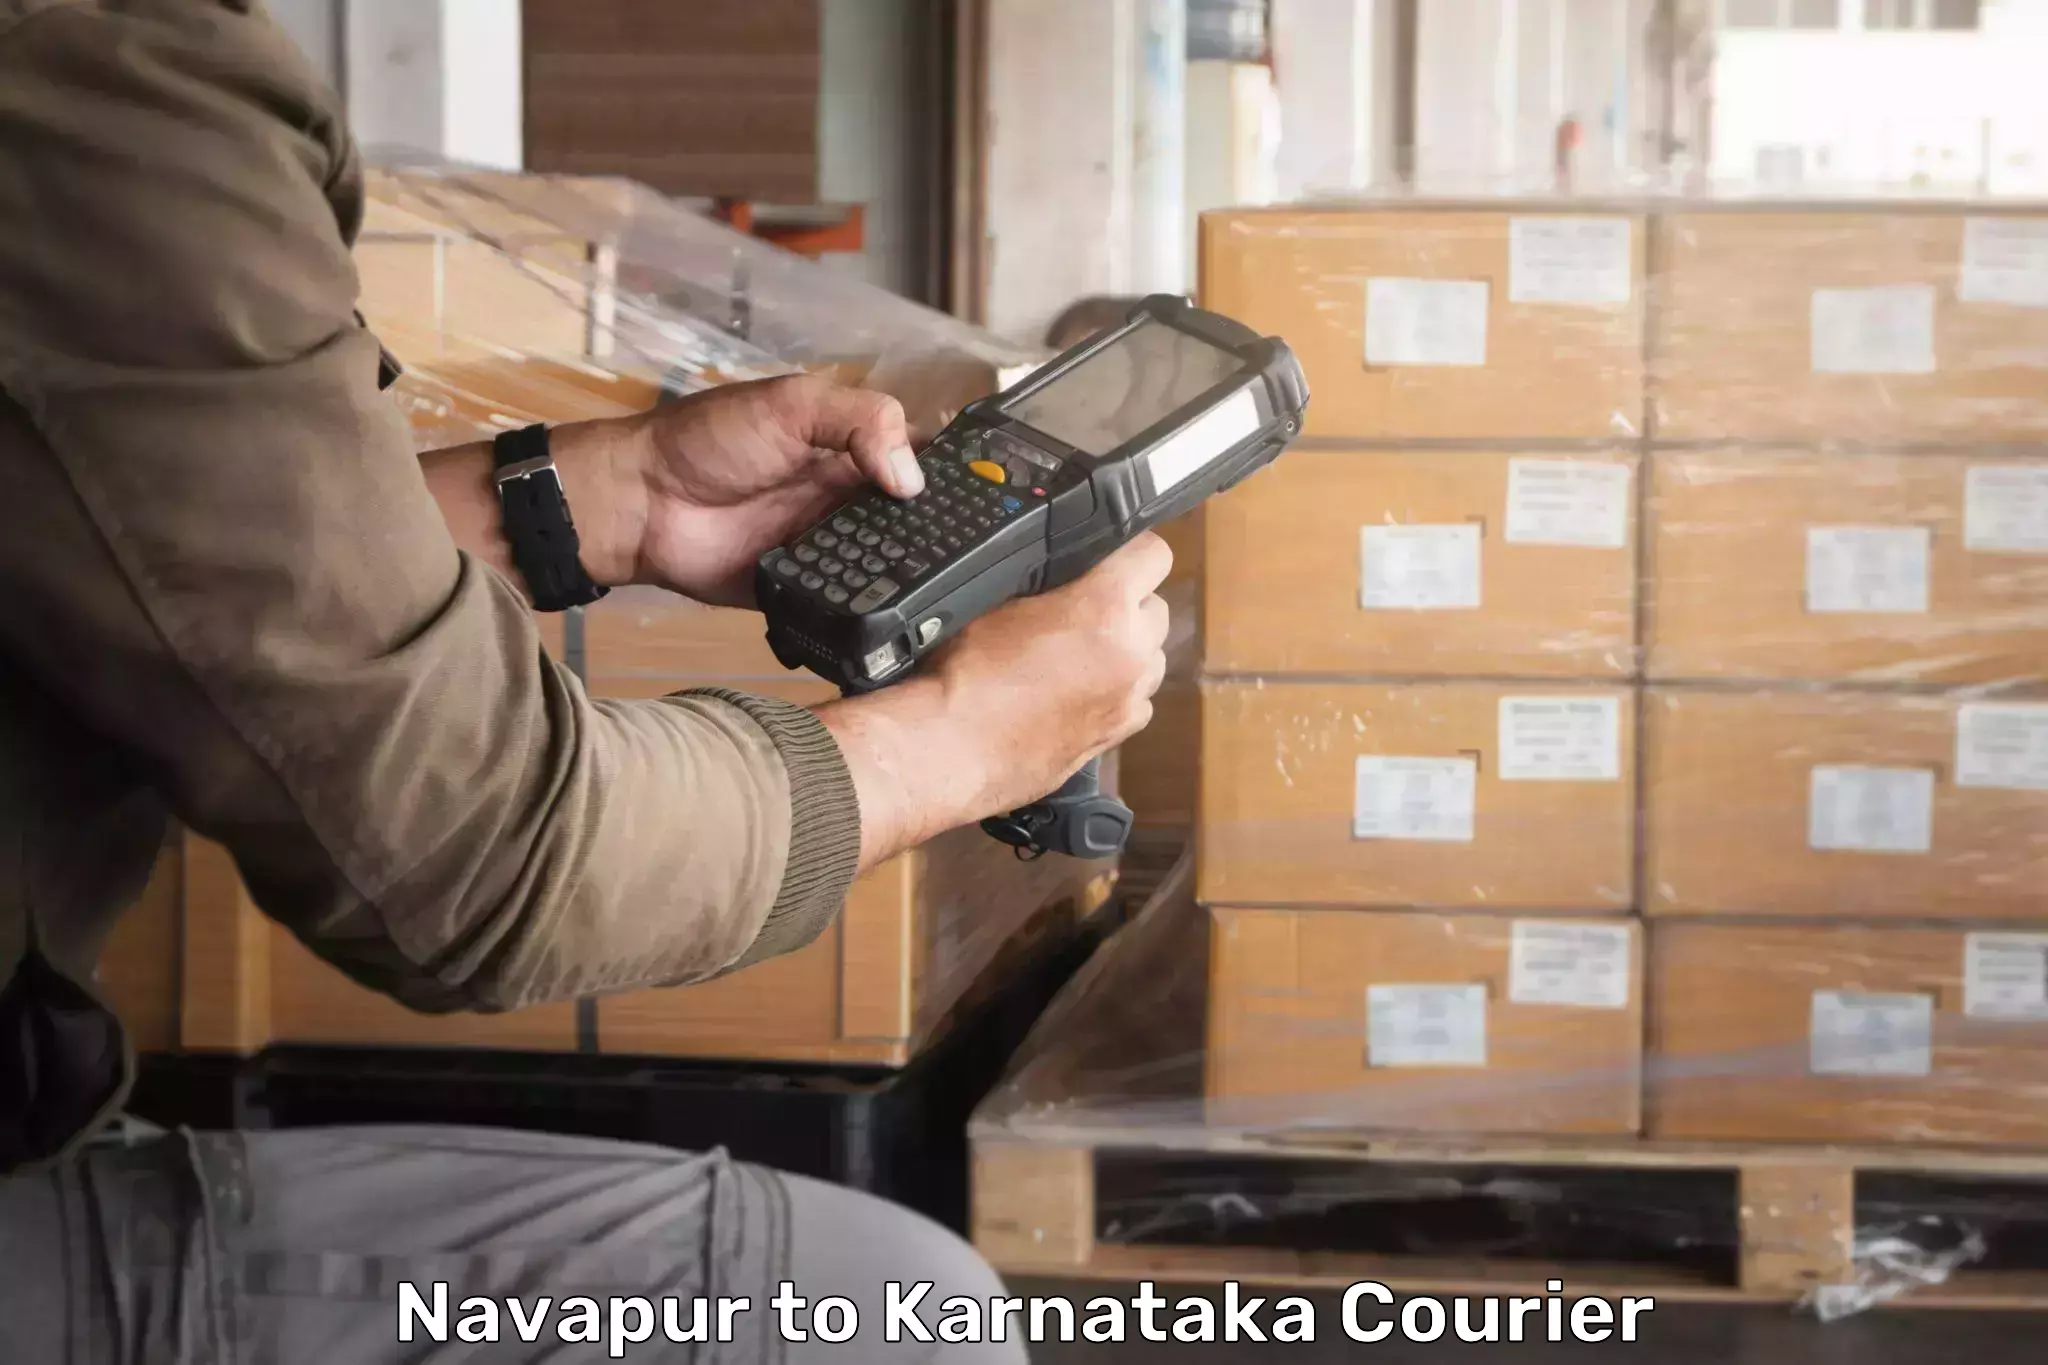 Advanced package delivery Navapur to Channapatna